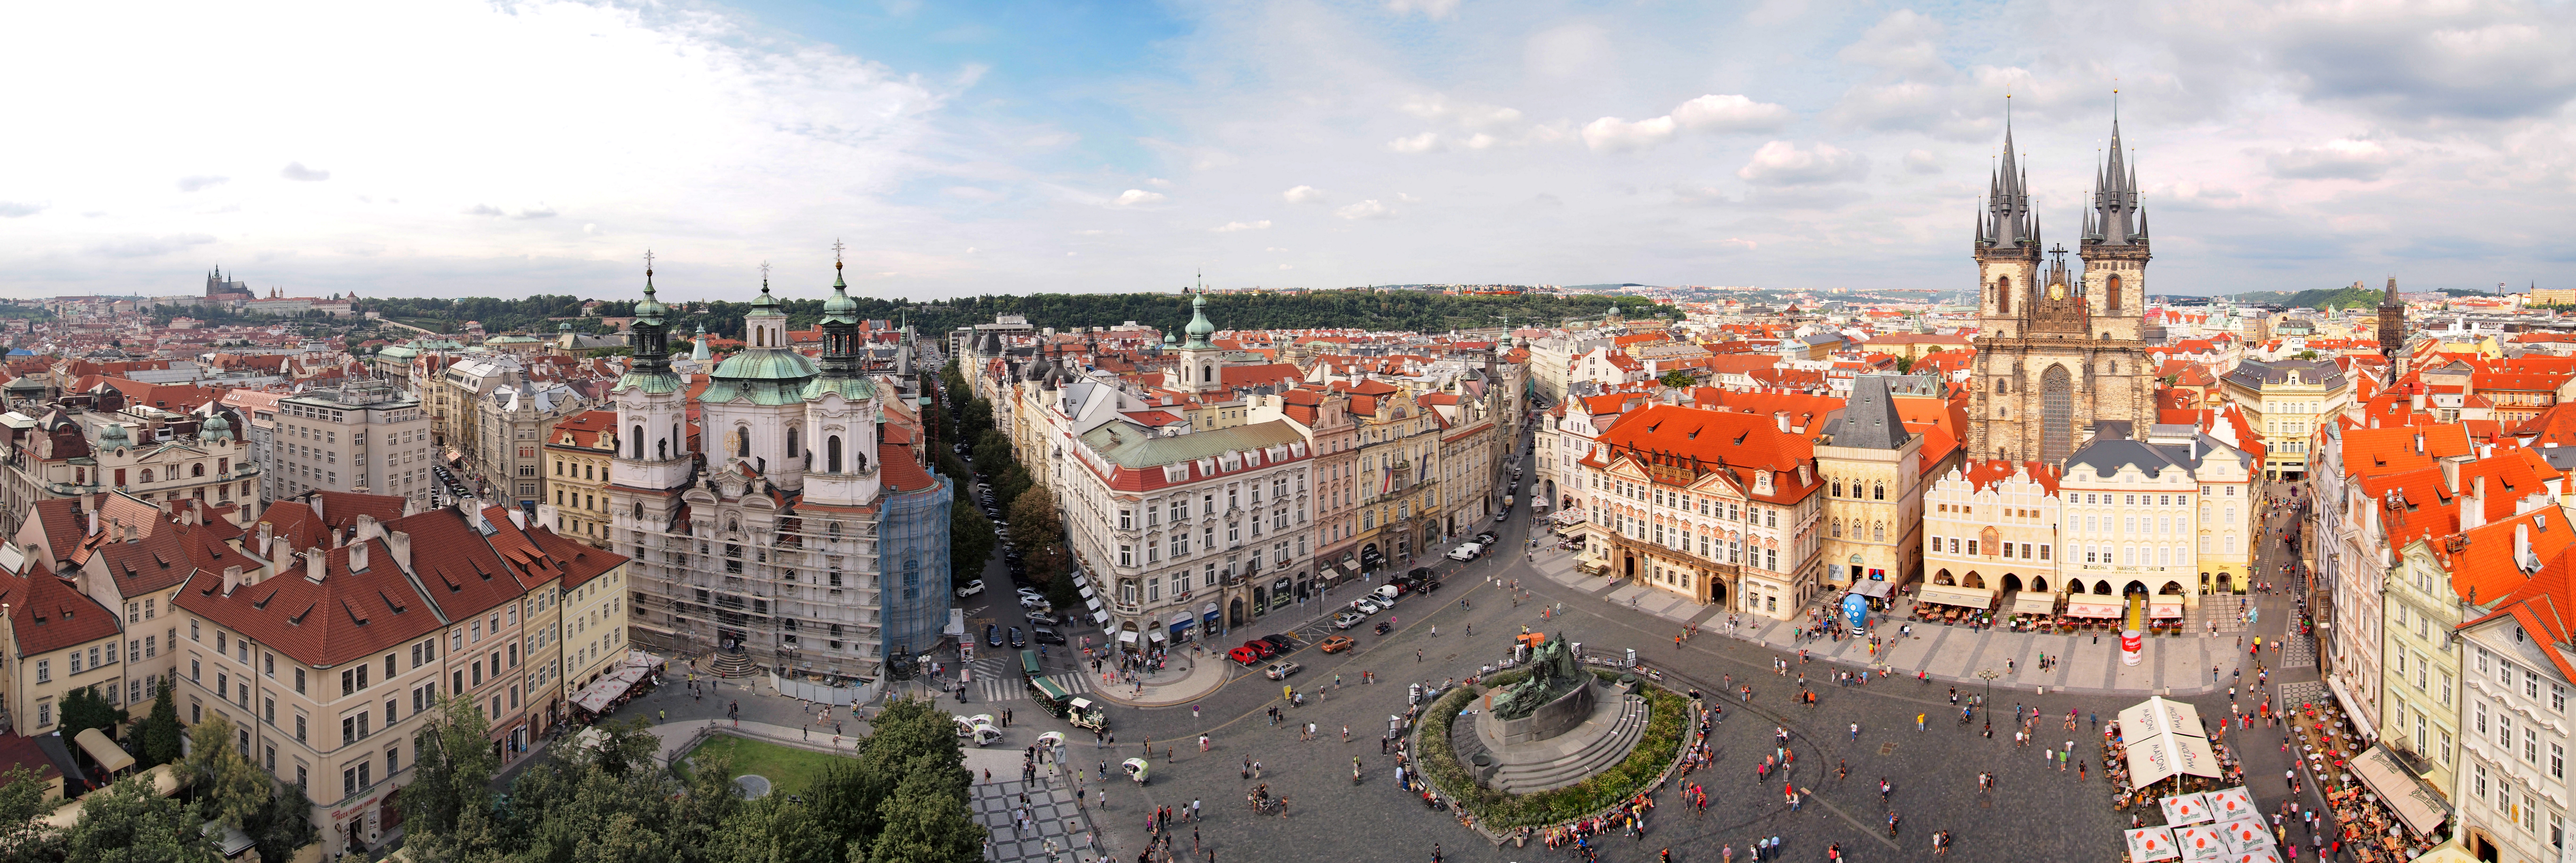 Nice wallpapers Old Town Square 10919x3659px